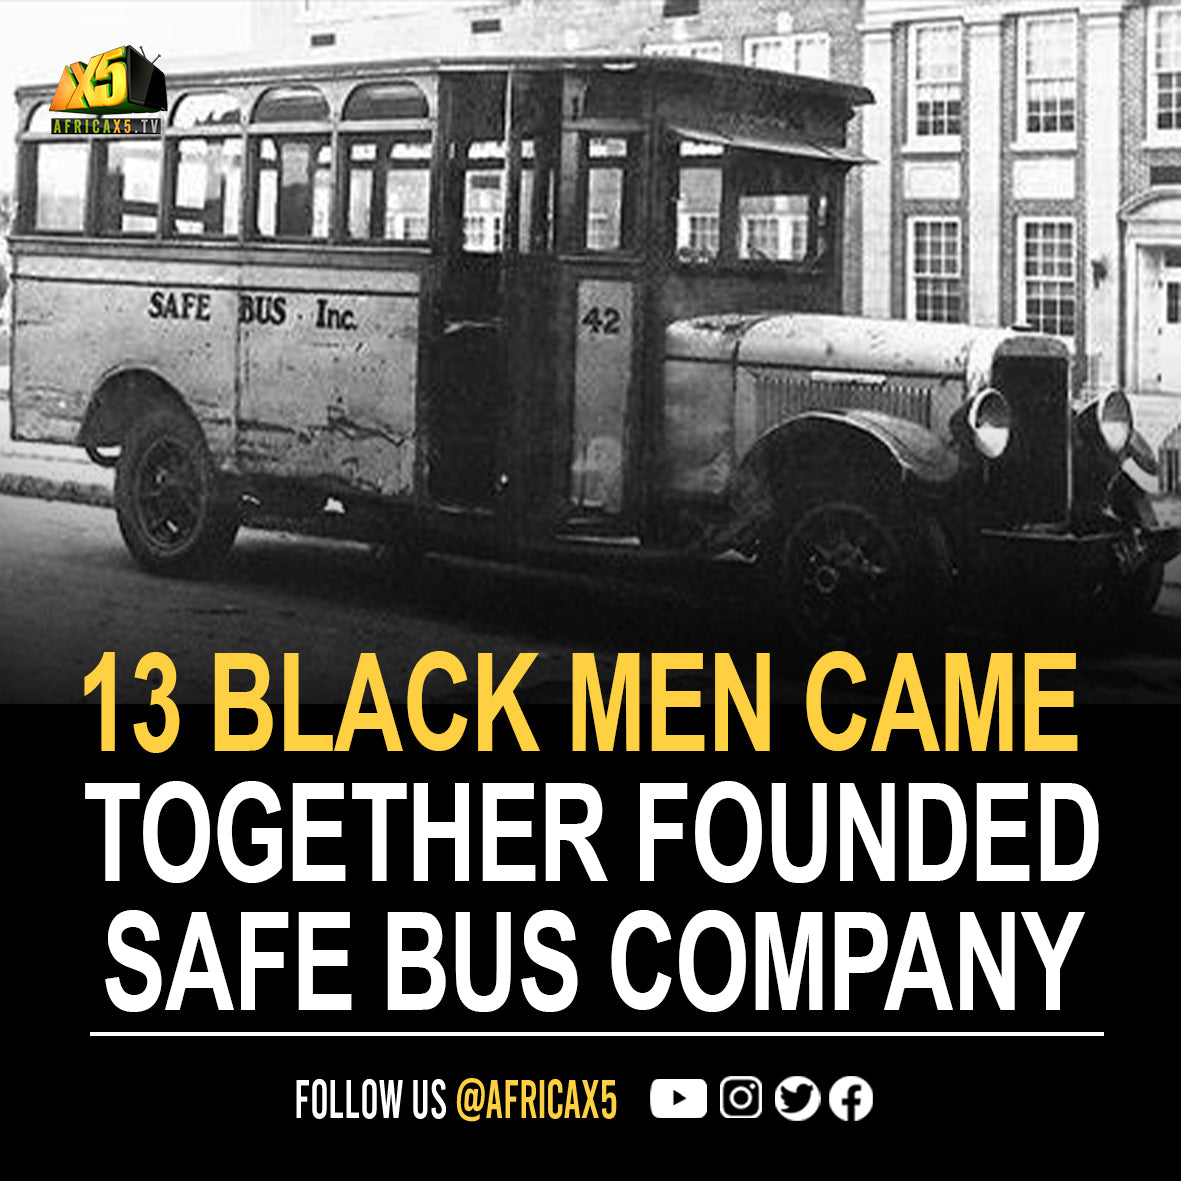 In 1926, thirteen black men put together their savings and founded  Safe Bus Company,  making it the largest black owned bus company at that time.